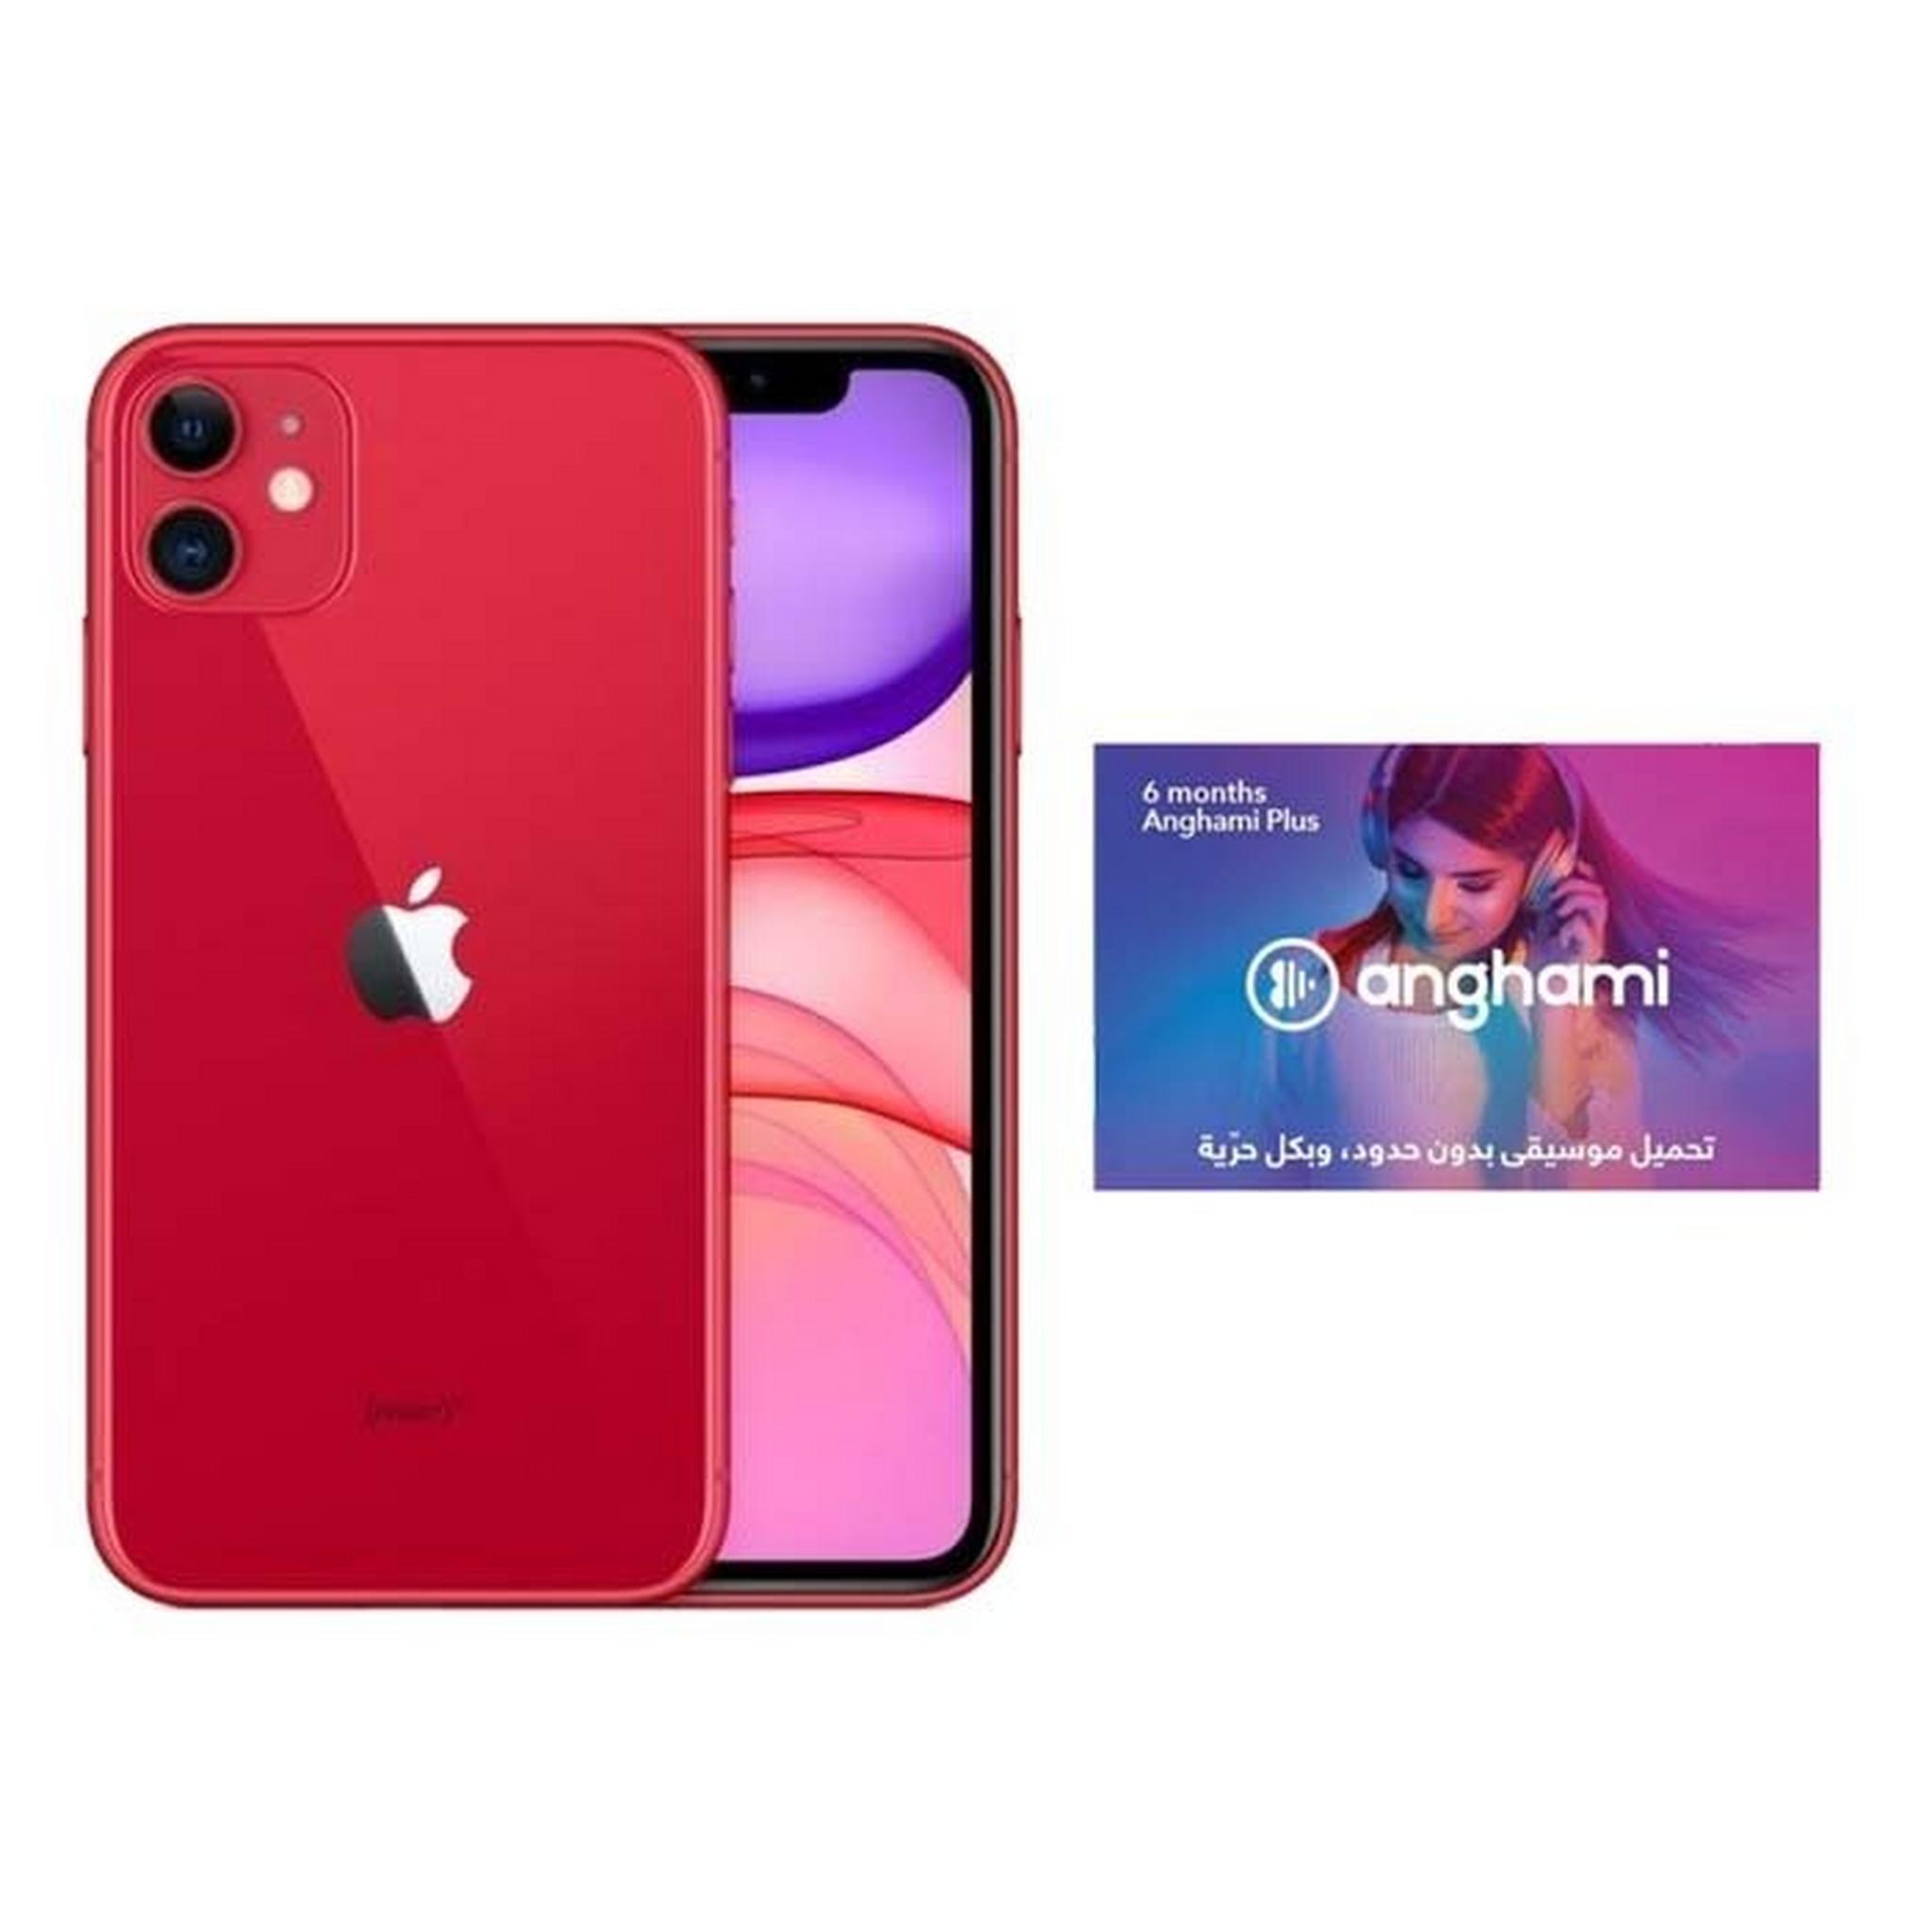 Apple iPhone 11 64GB Phone - Red + Anghami Plus 30$ 6 Months Subscription